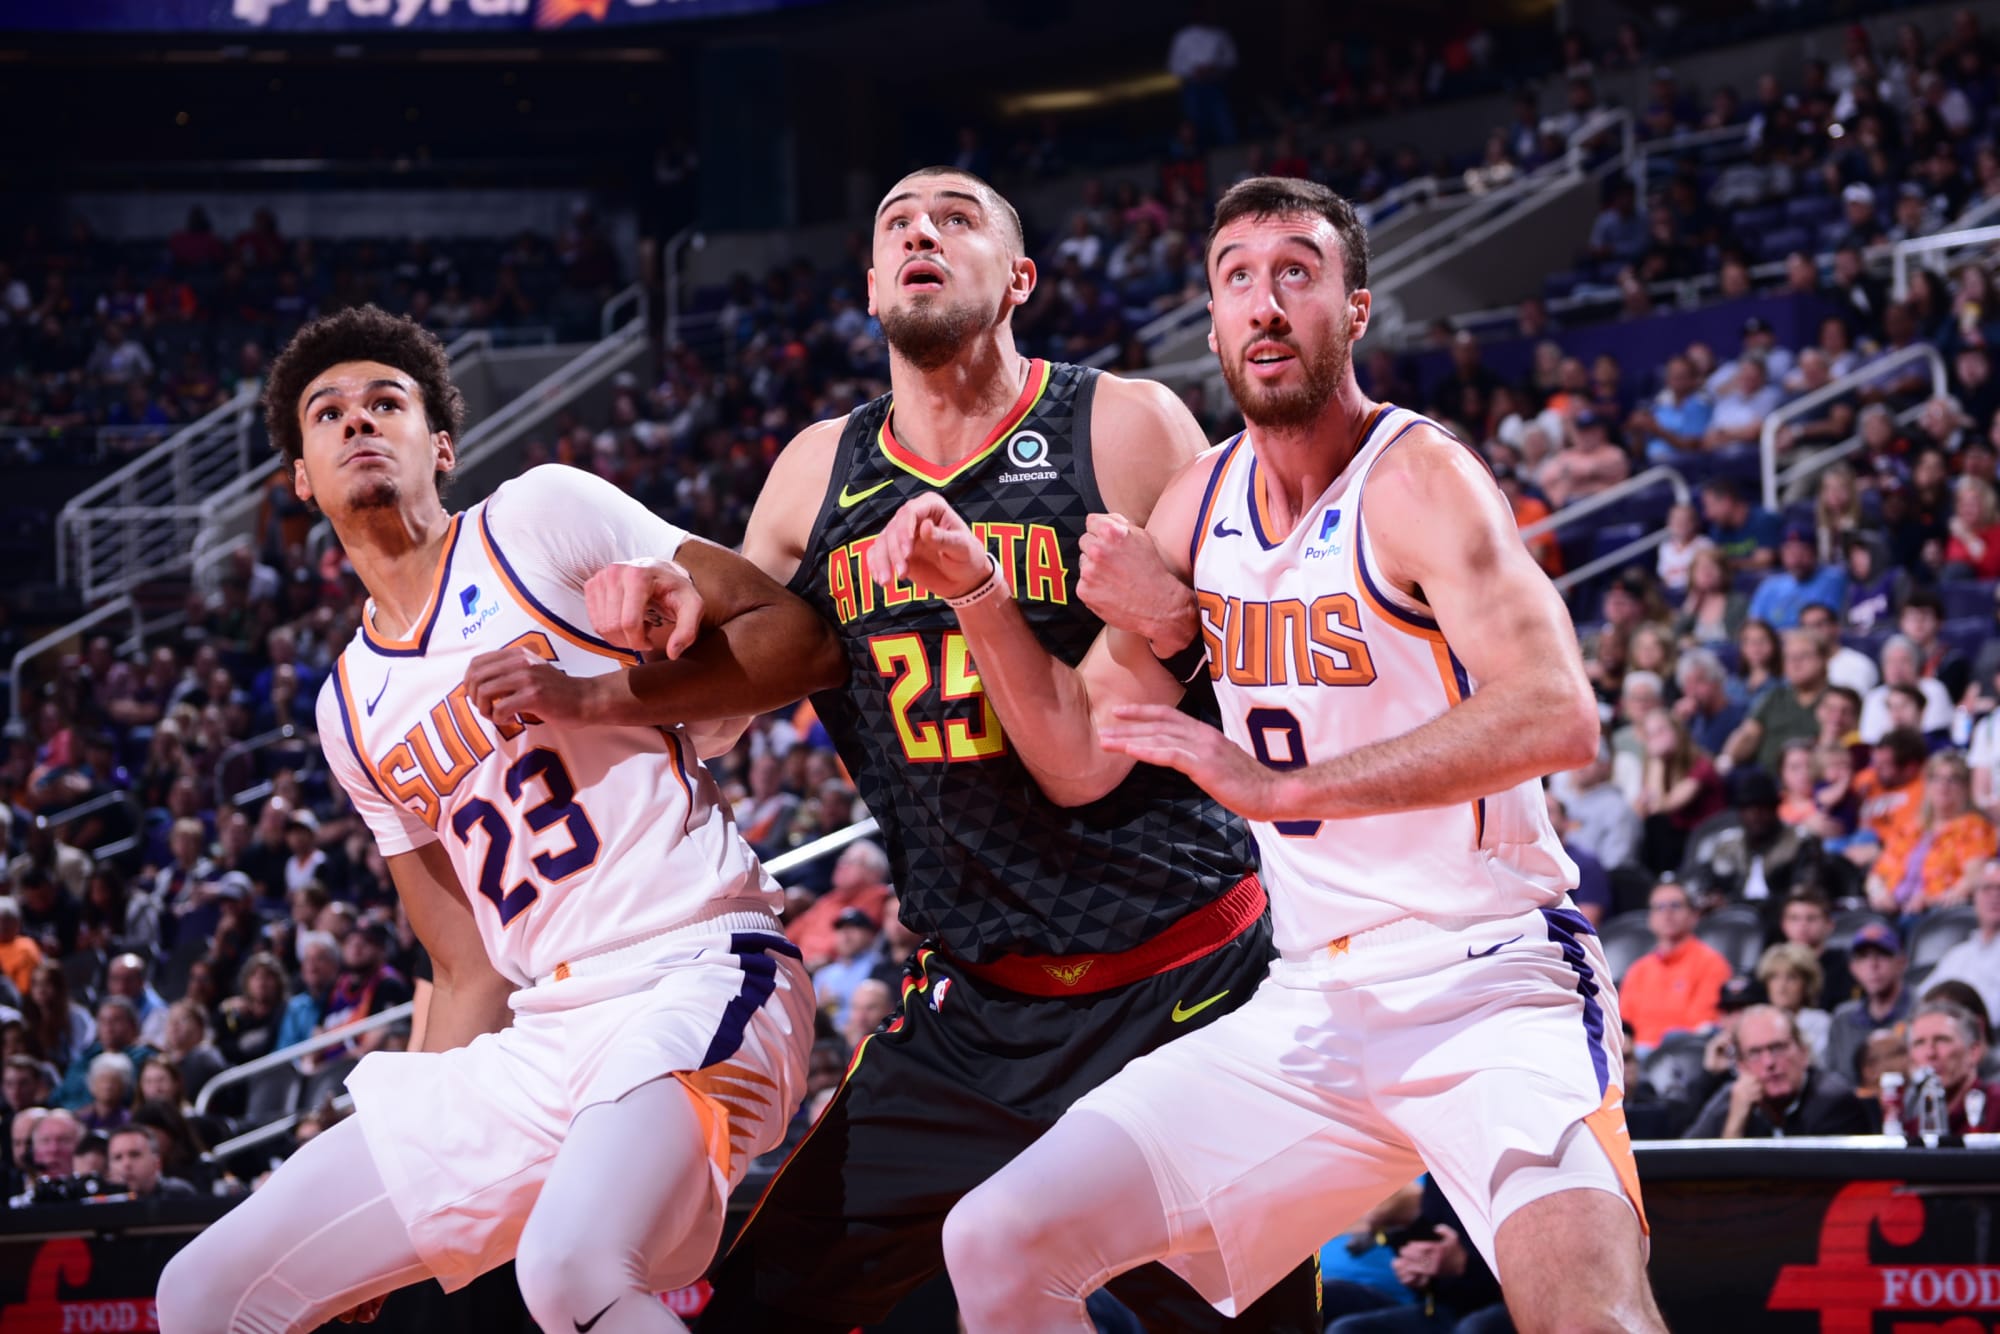 The Phoenix Suns dominated a game they were supposed to dominate